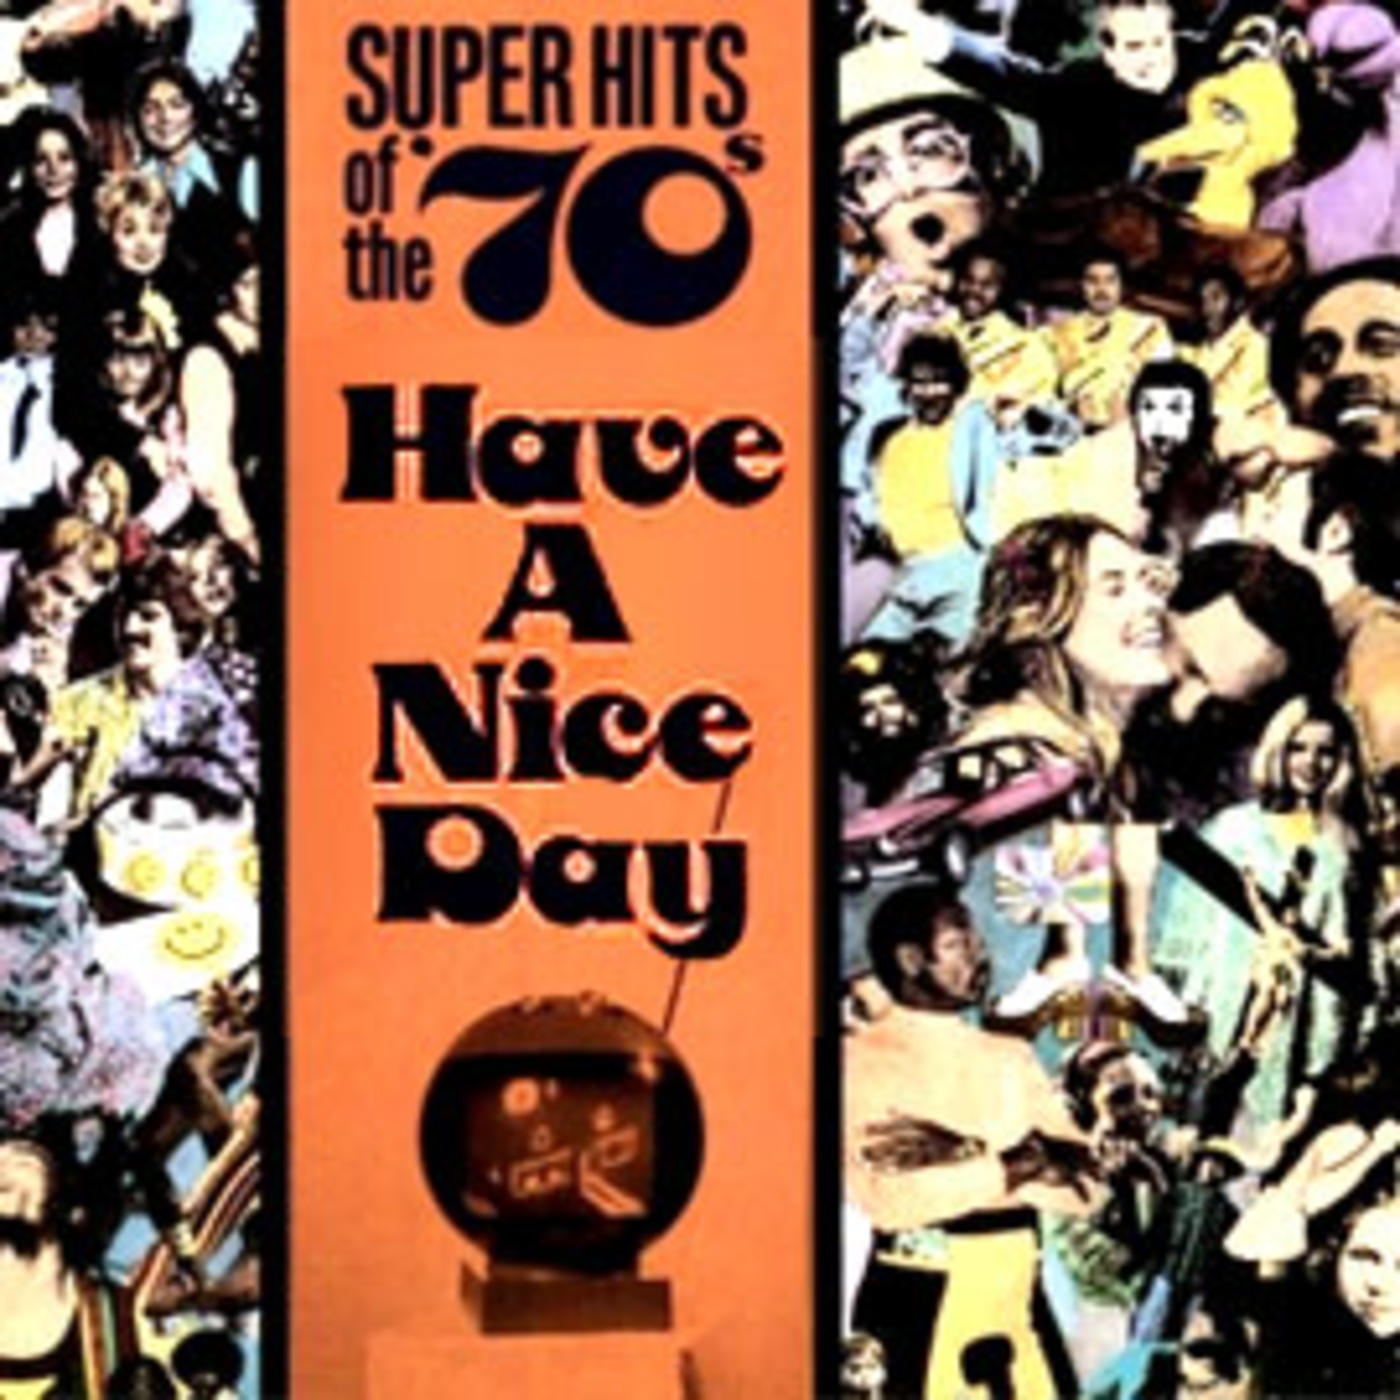 Have A Nice Day - The 70s - Canned Heat, Malo, Ray Price, Bloodstone, Brewer, Shipley, Archie Bell & The Drells, Timmy Thomas, Christie, Clarence Carter, George McCrae, Wadsworth Mansion